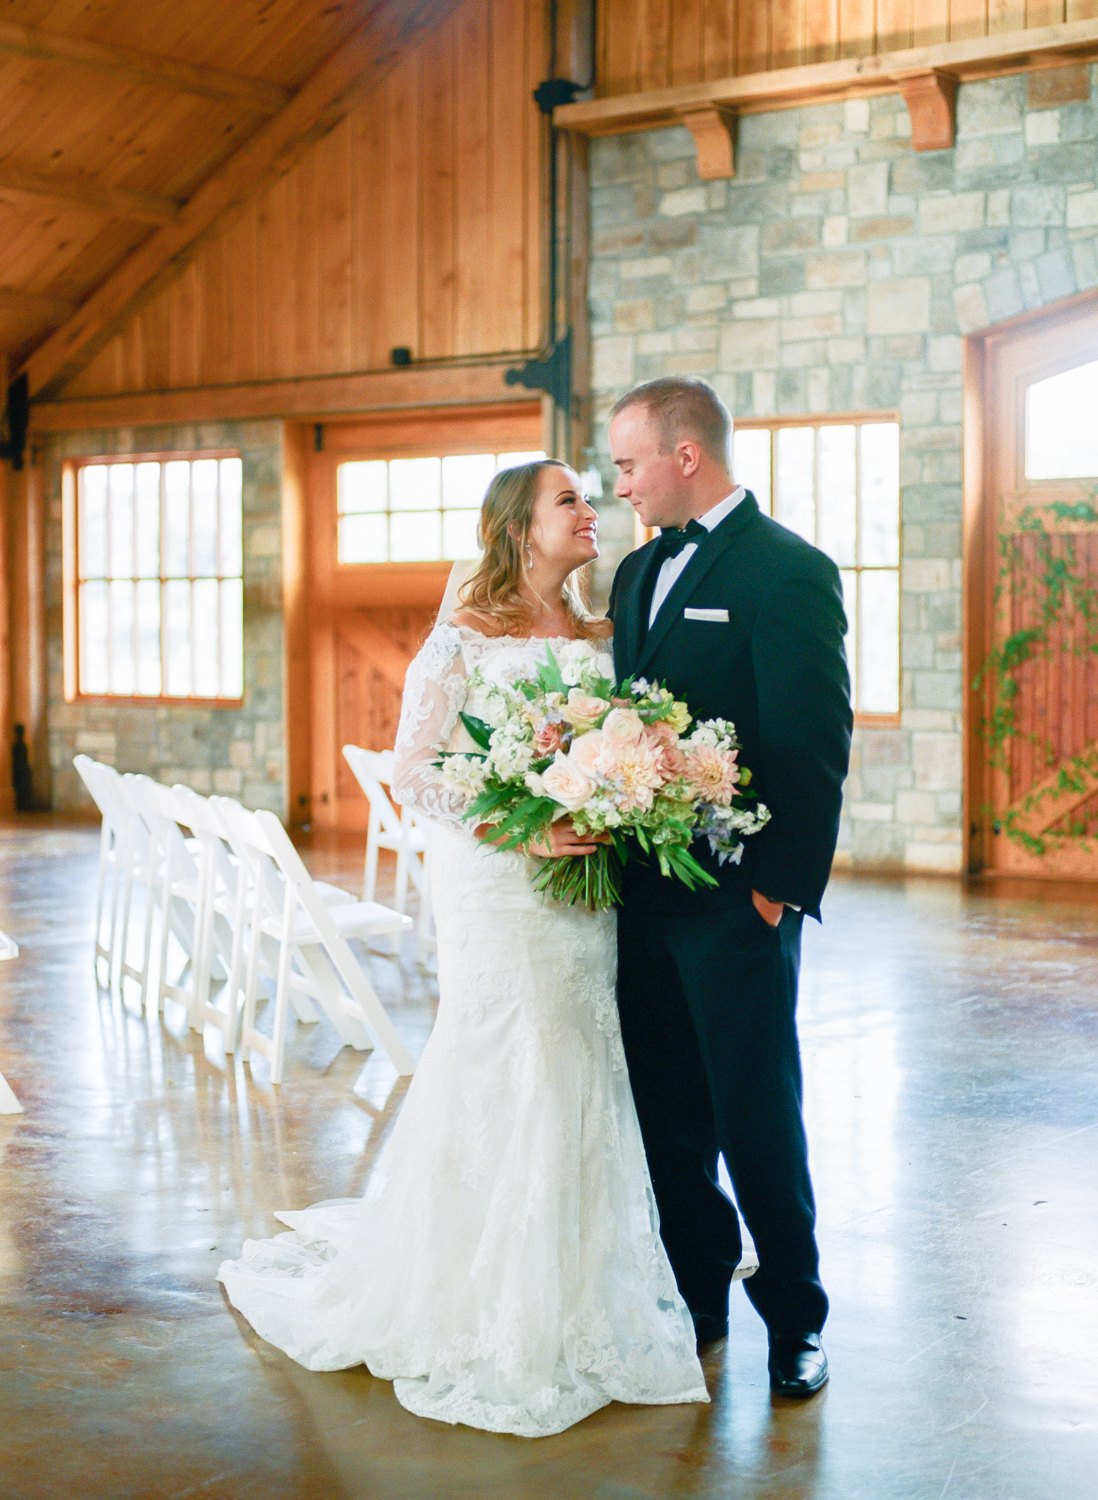 Bride and groom getting married at Mighty Oak Lodge, Mimi's Bridal, Missouri Wedding Photographer Erica Robnett Photography